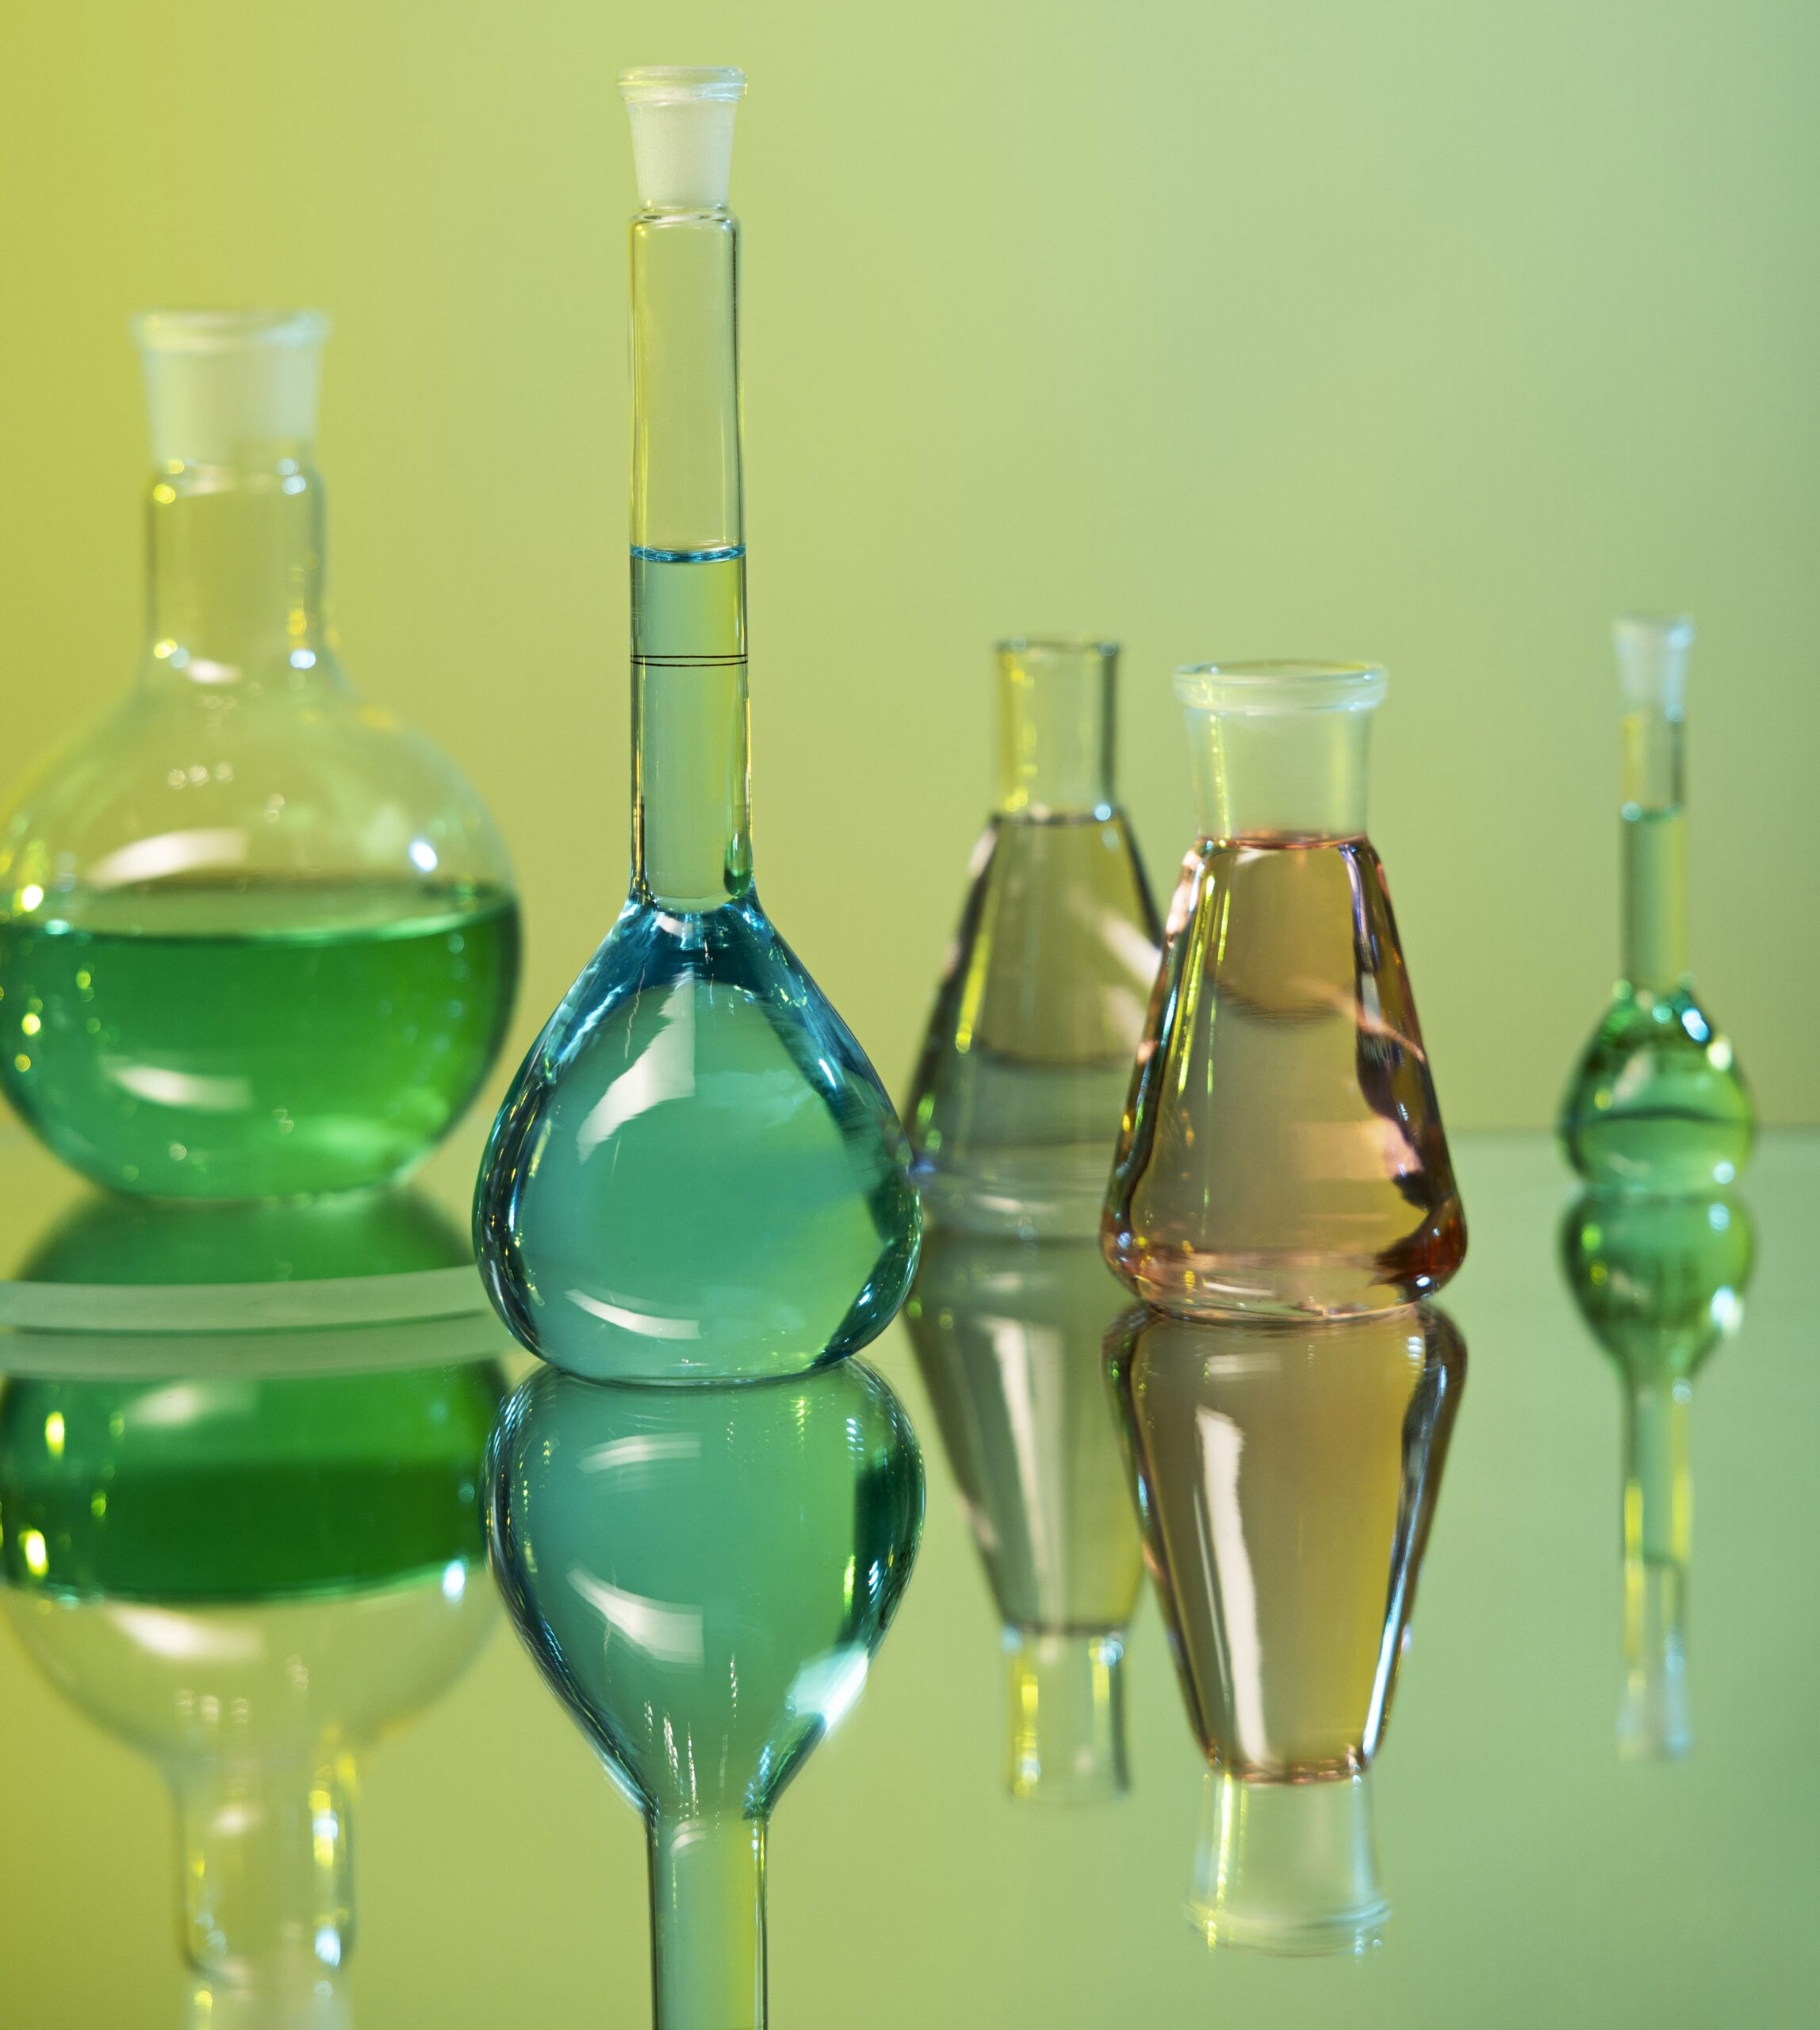 The Rise of Specialty Chemicals in India: Exploring the Growth Opportunities​